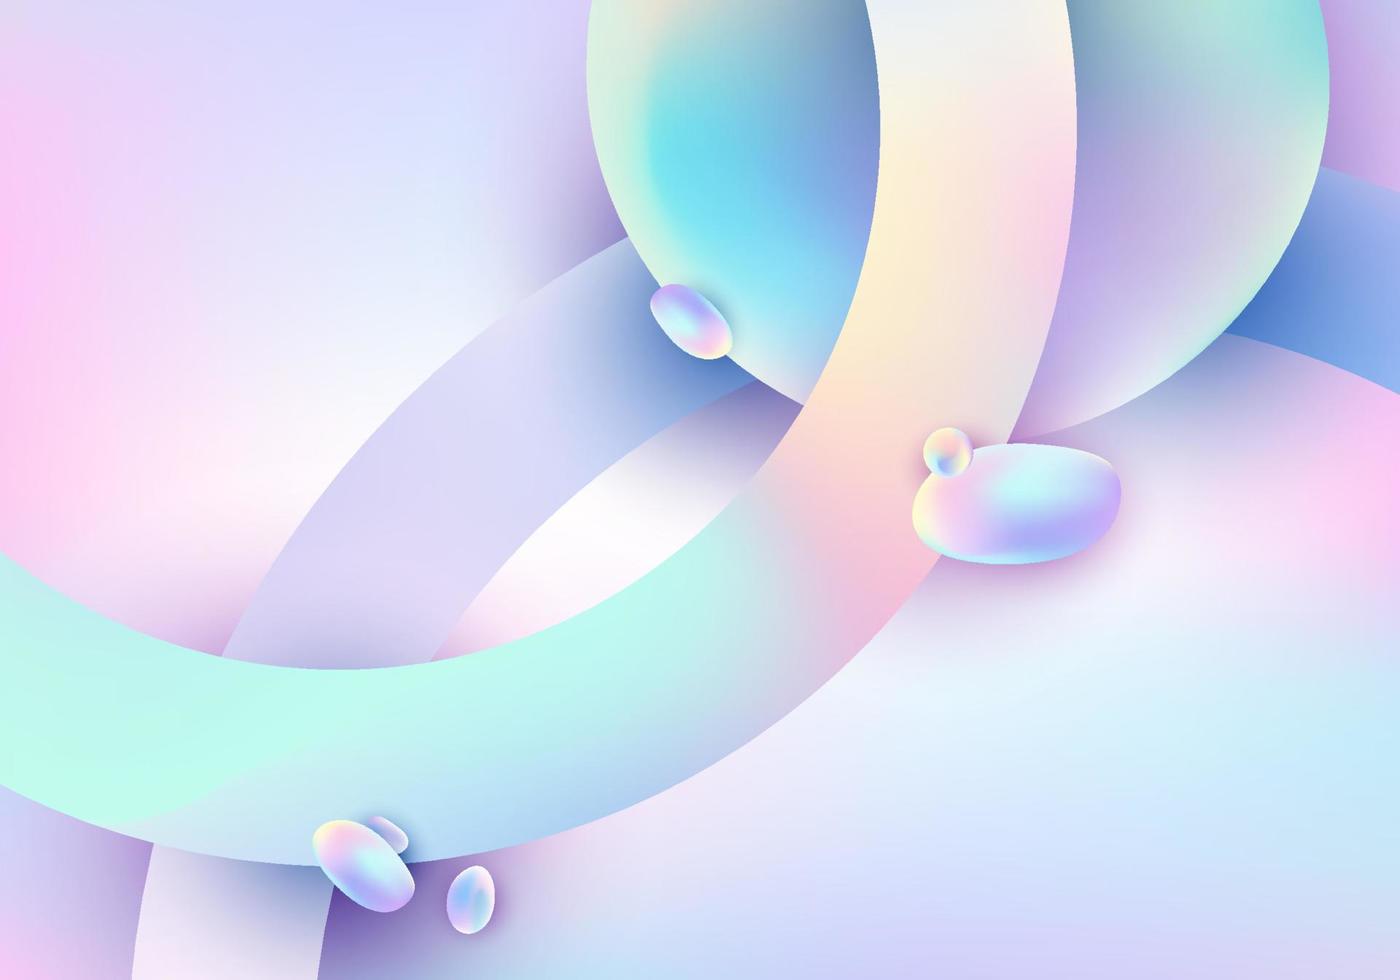 Abstract 3D geometric circles overlapping and fluid pastel gradient shape background vector